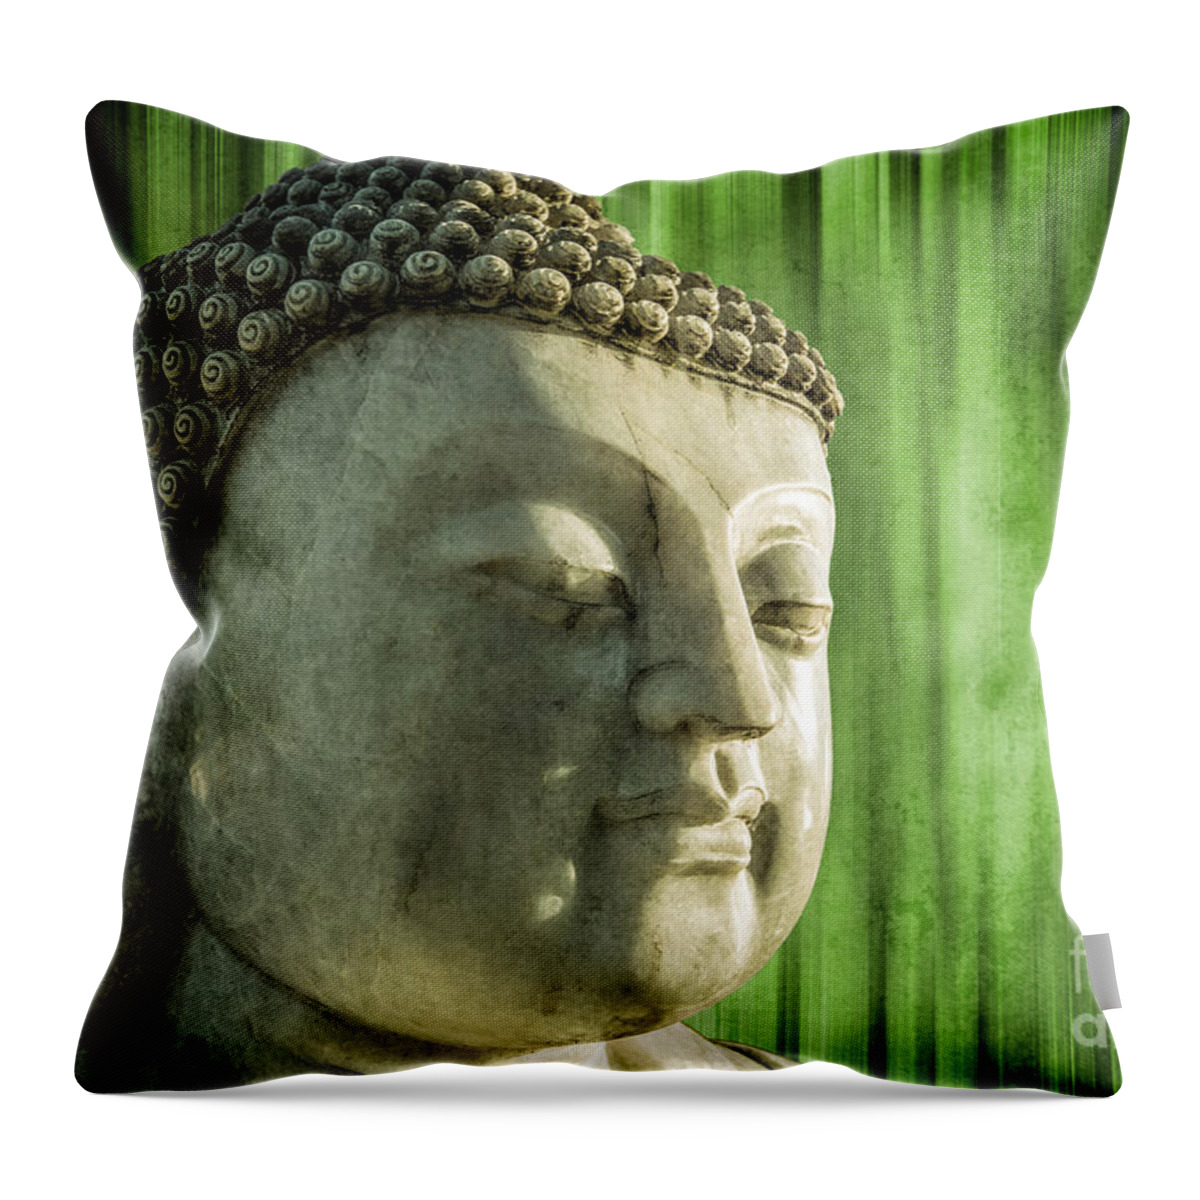 Statue Throw Pillow featuring the photograph Buddha - bamboo by Hannes Cmarits